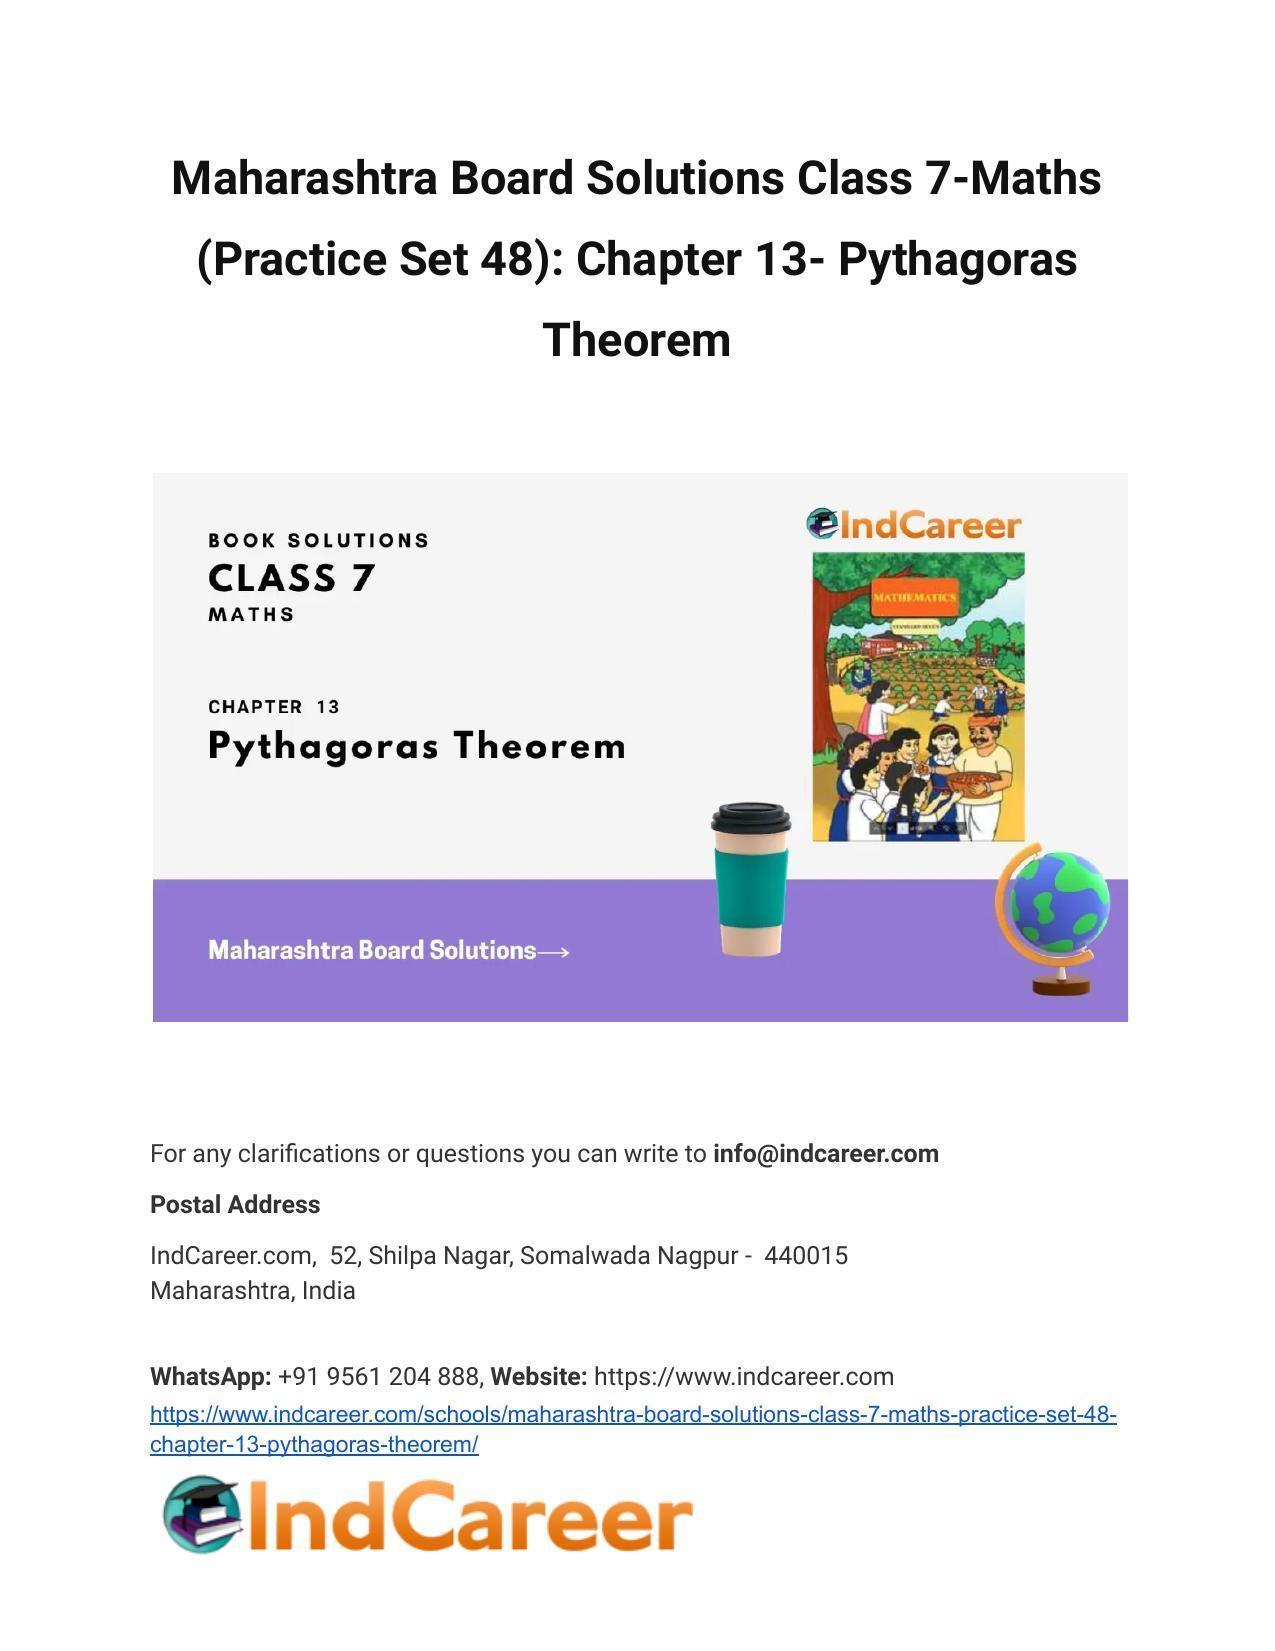 Maharashtra Board Solutions Class 7-Maths (Practice Set 48): Chapter 13- Pythagoras Theorem - Page 1